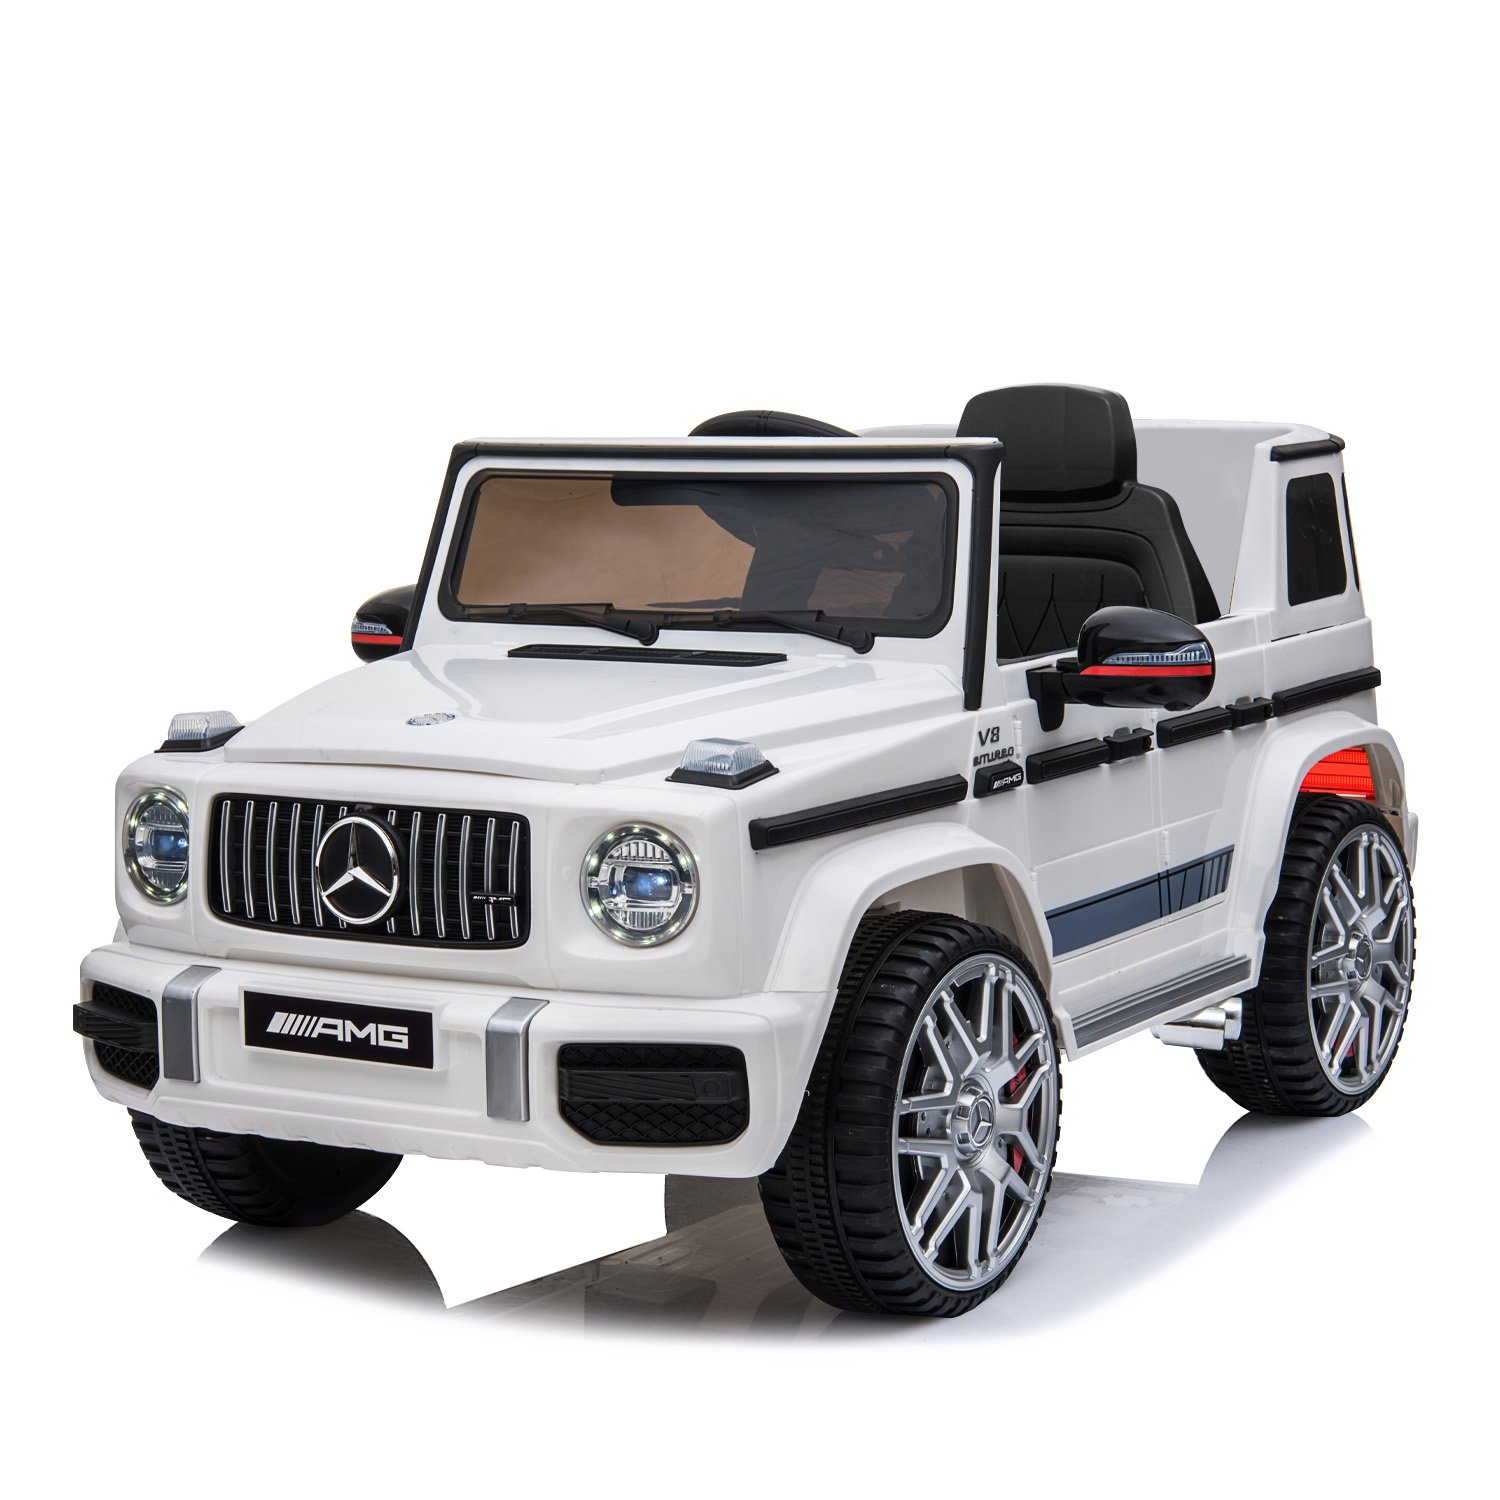 Mercedes Benz AMG G63 Licensed Kids Ride On Electric Car Remote Control - White 1